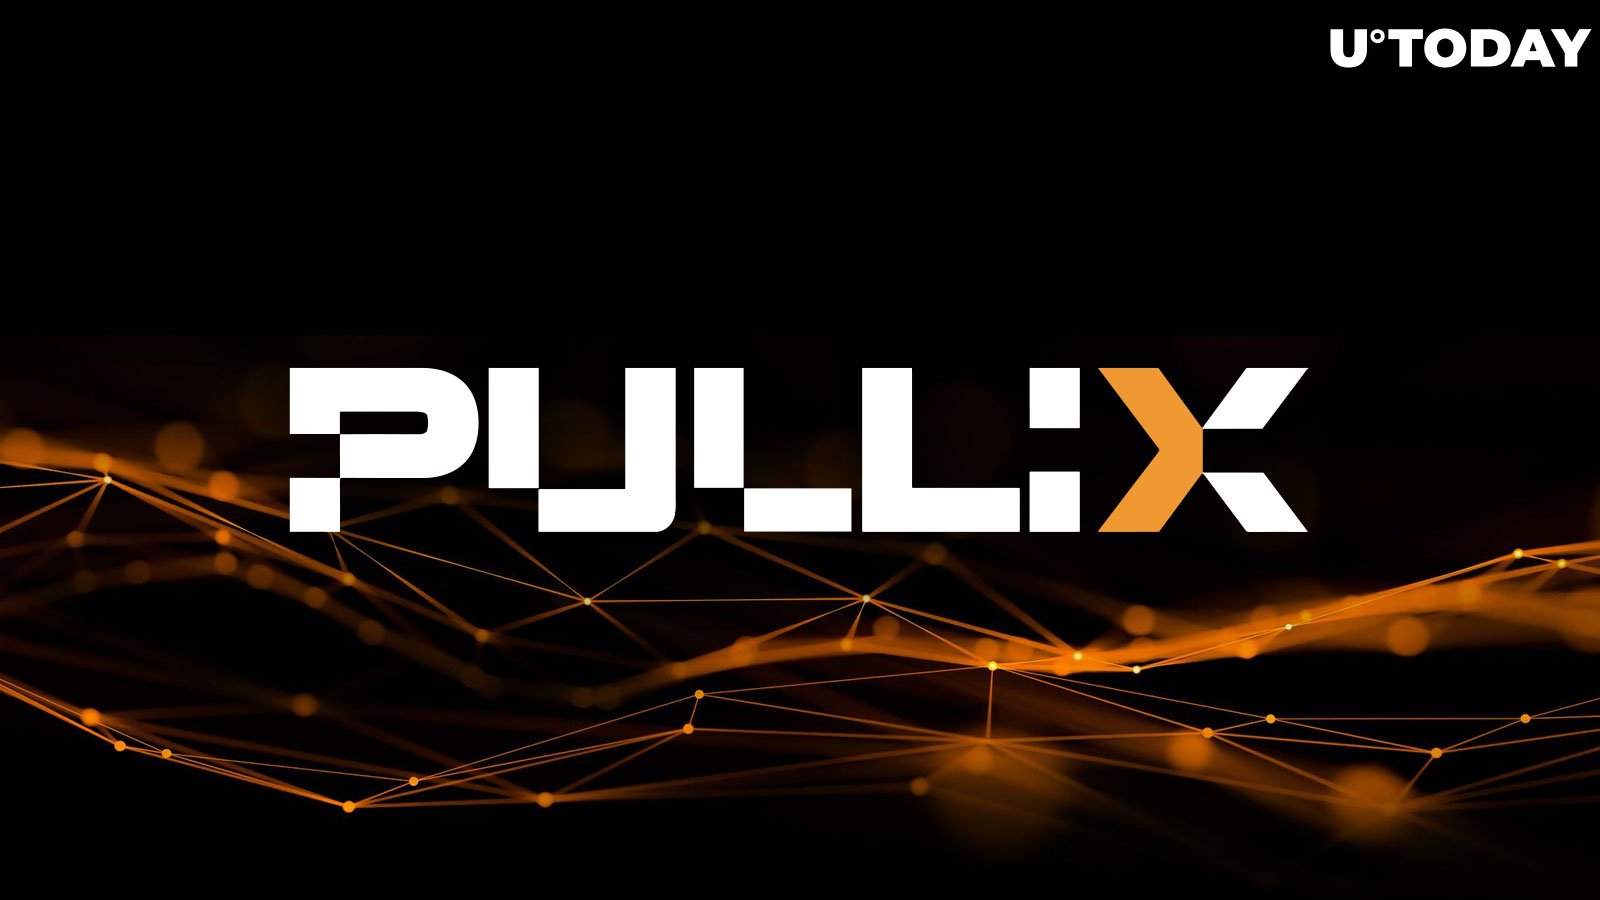 Bonk (BONK), Ethereum (ETH), and Dogecoin (DOGE) Users Are Now Looking at TradFi Markets, as Pullix (PLX) Enters New Presale Stage